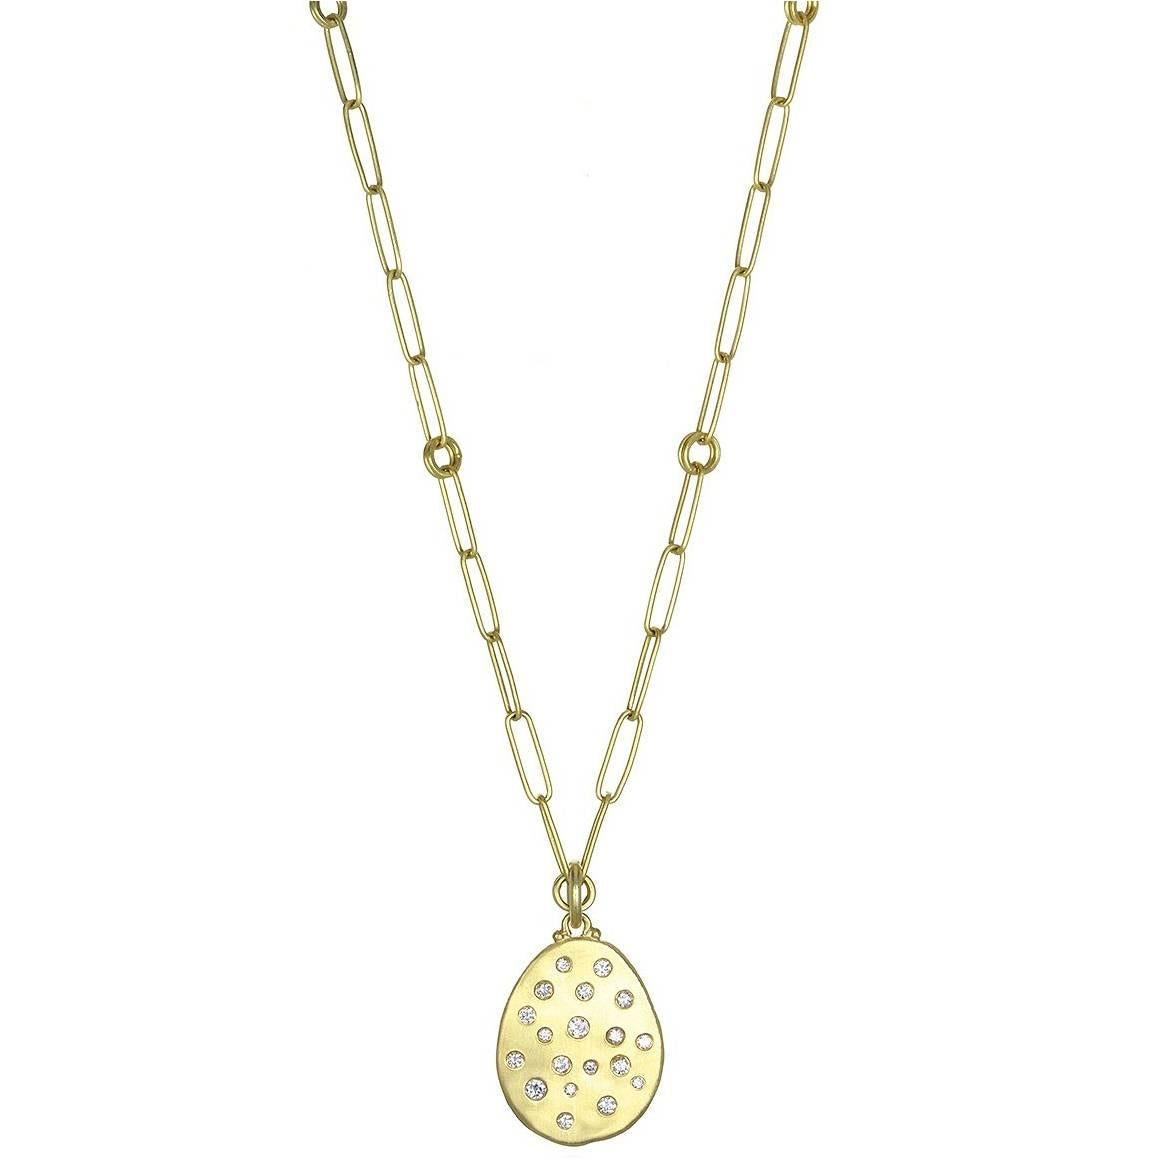 The dog tag pendant has been given a sophisticated twist.  Displayed on a paperclip chain, the 18K gold diamond dog tag pendant is one of Faye Kim's signature designs.  Layer with shorter necklaces or wear on a leather cord for 
a casual, chic